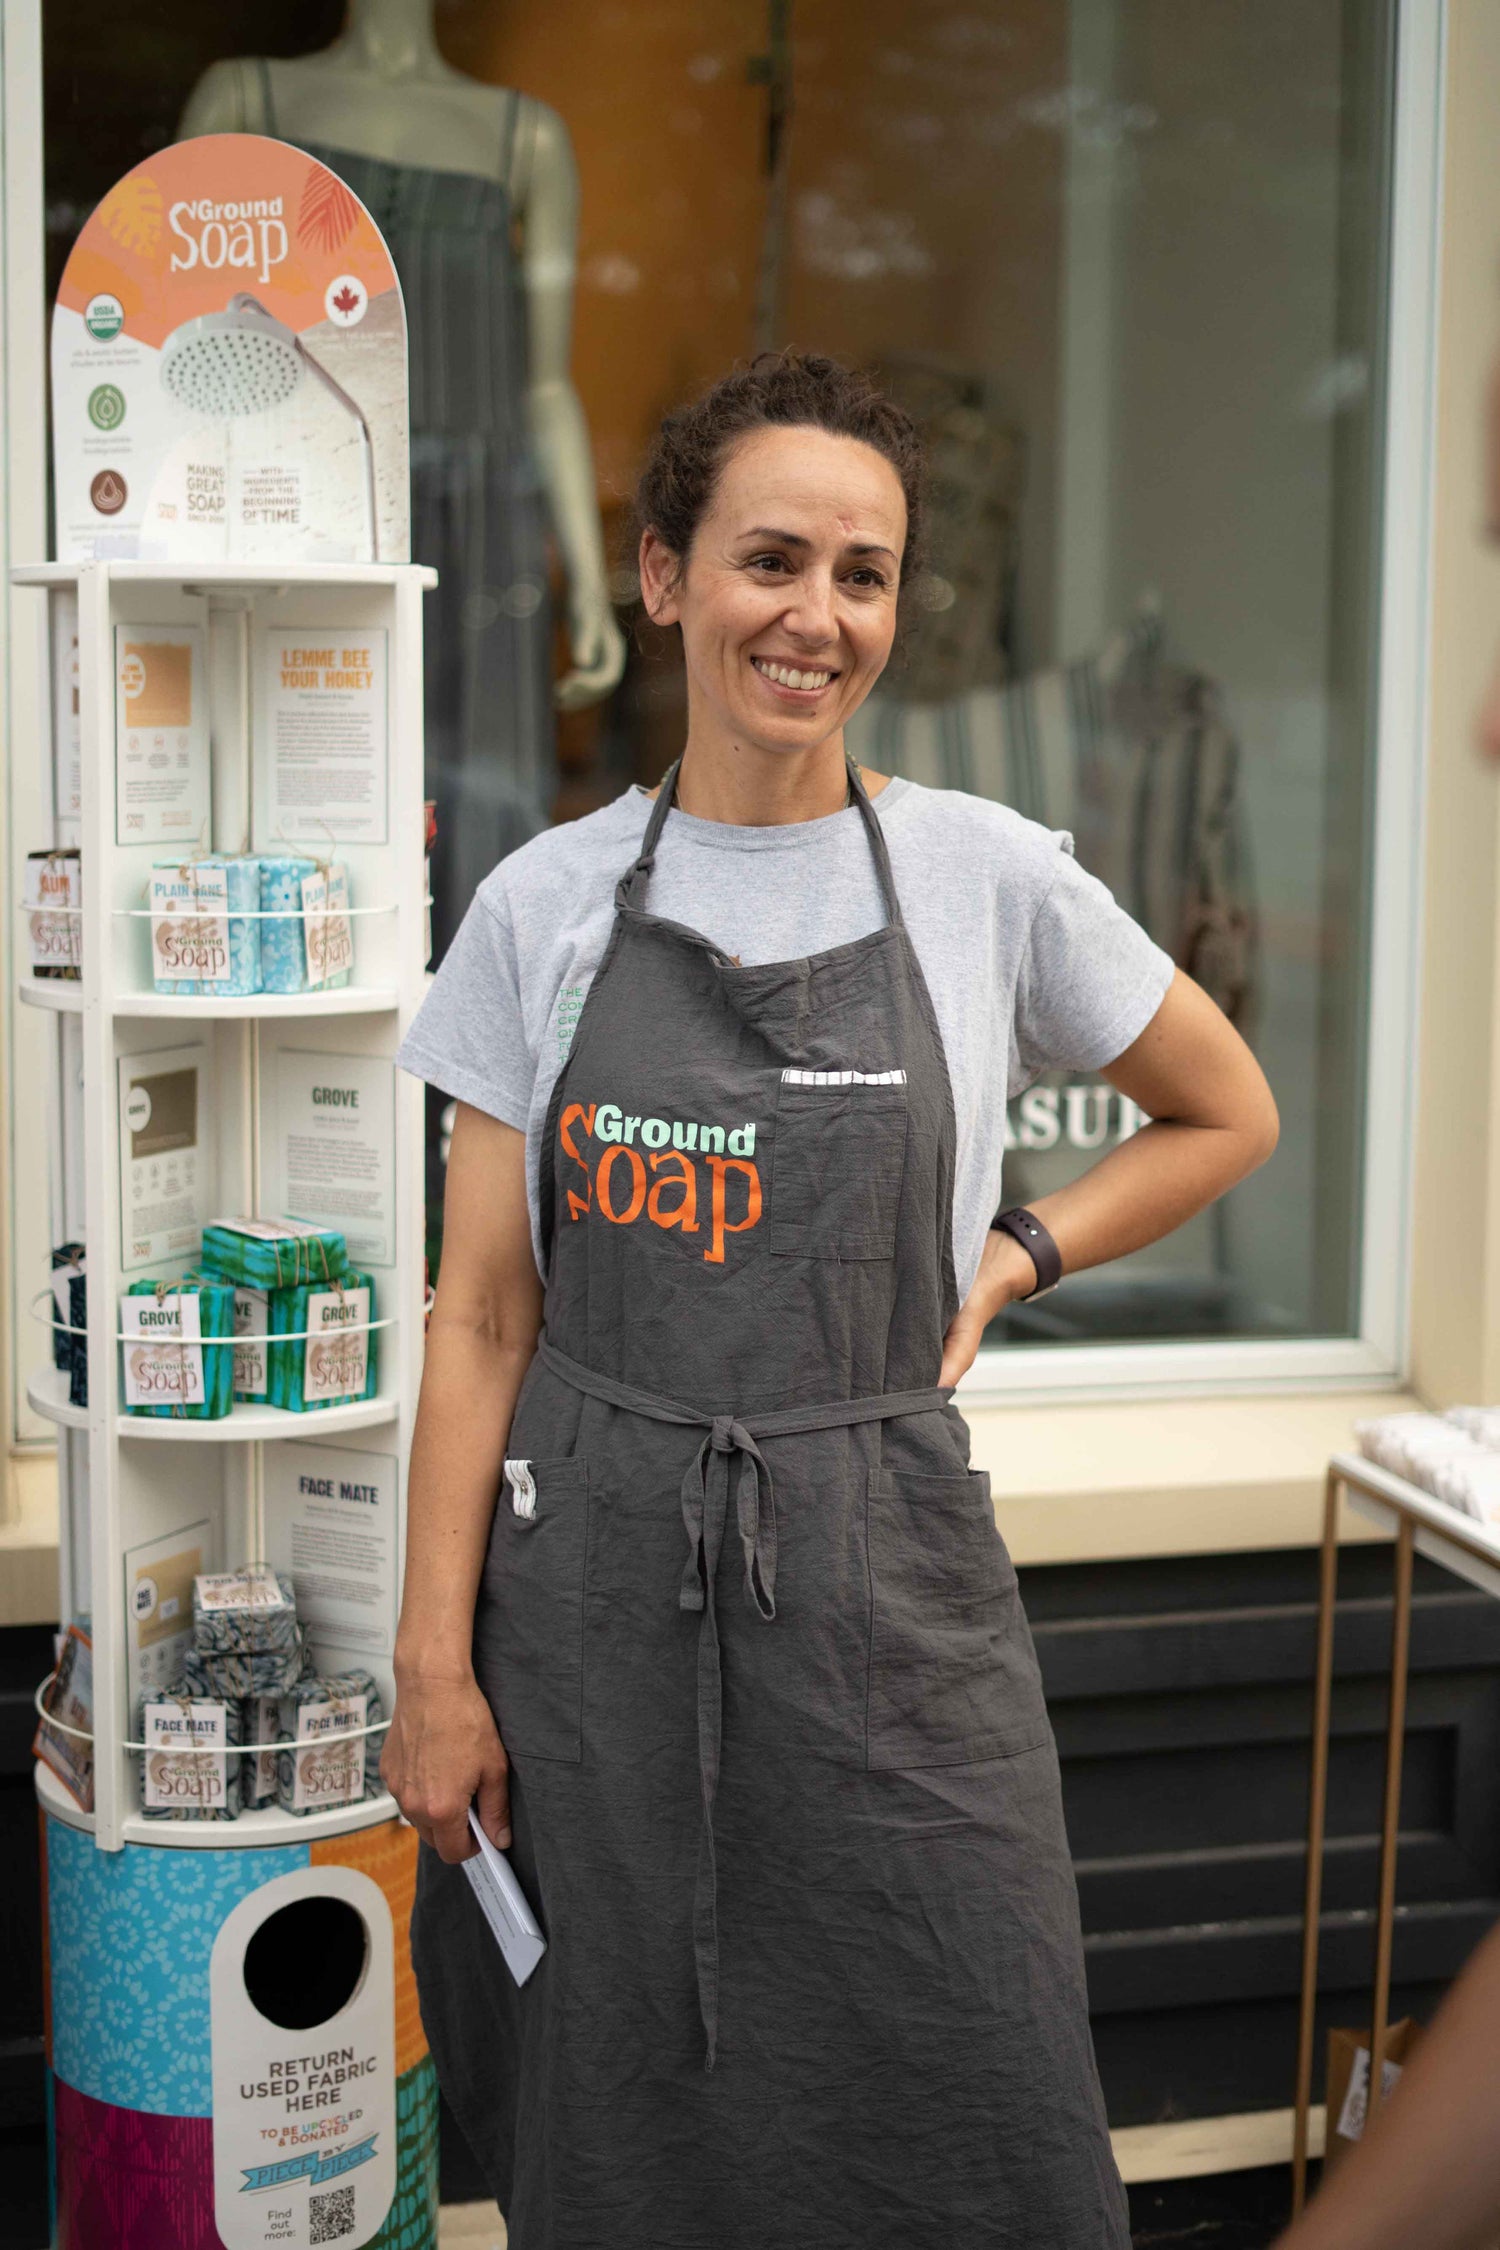 Angela Youngs, the founder of Ground Soap, standing next to her store display